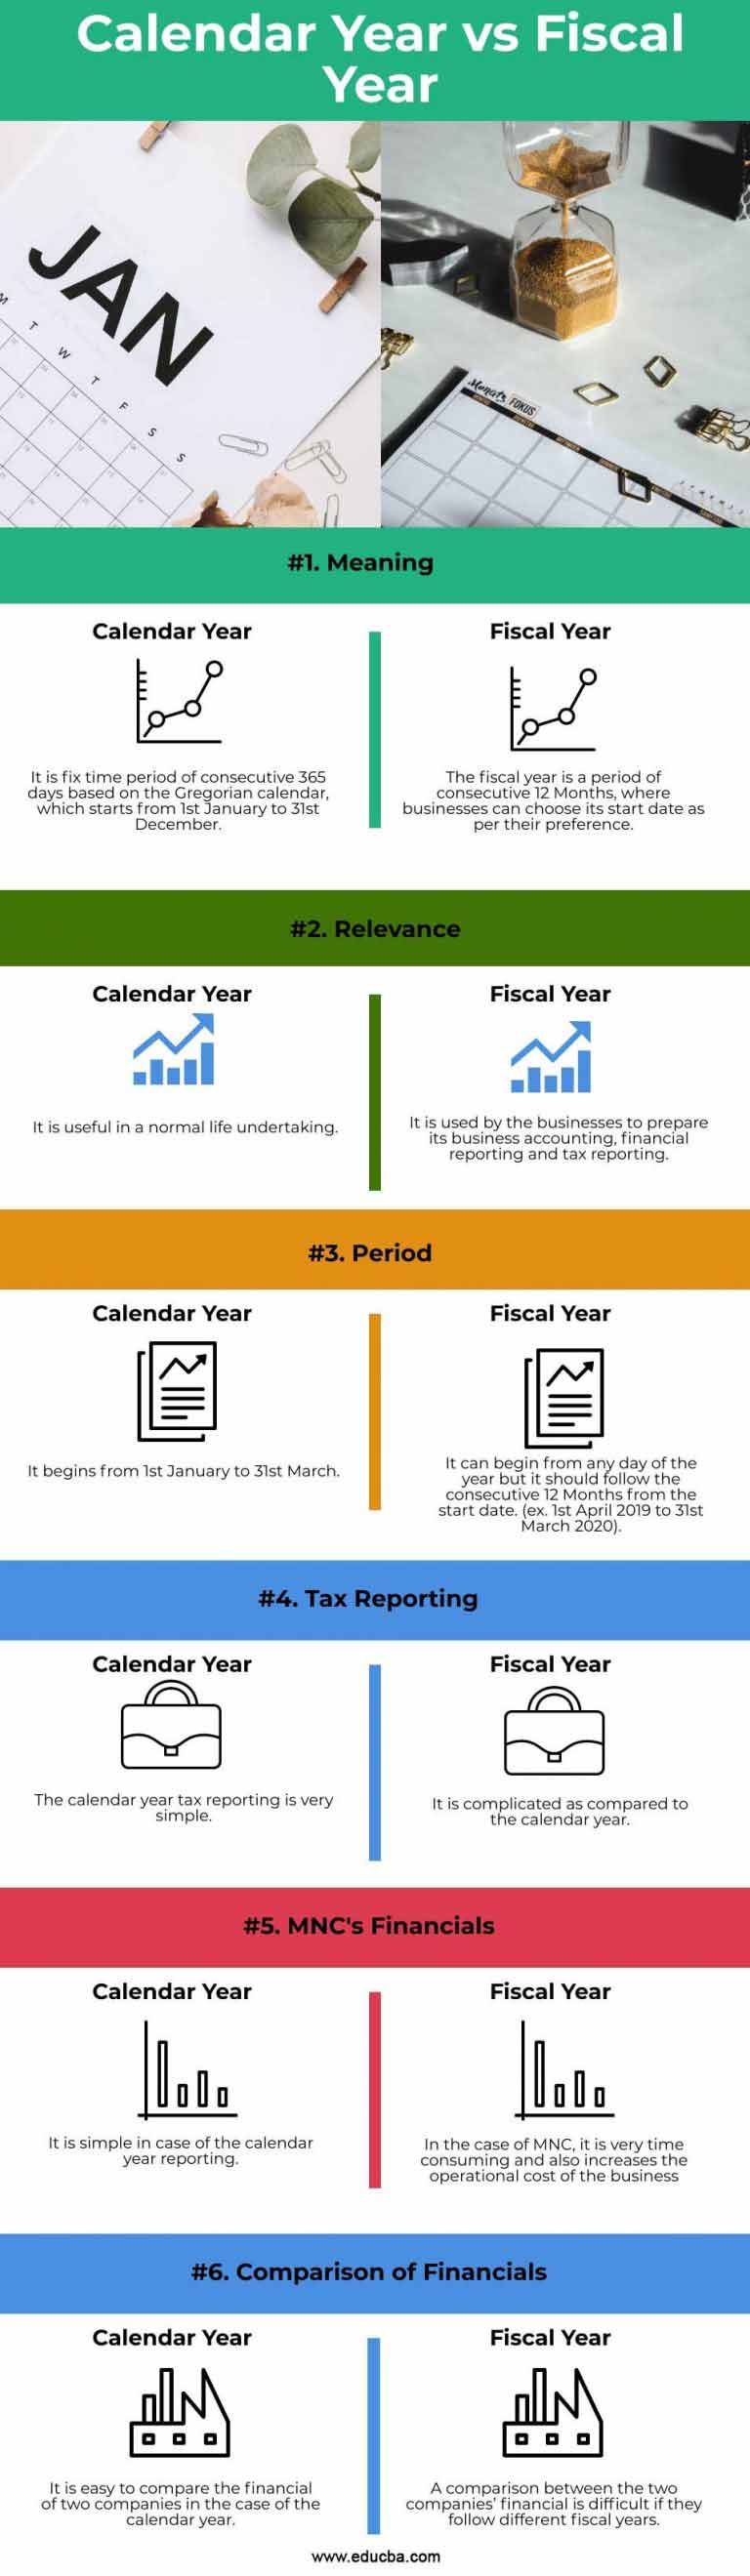 Calendar Year vs Fiscal Year Top 6 Differences You Should Know